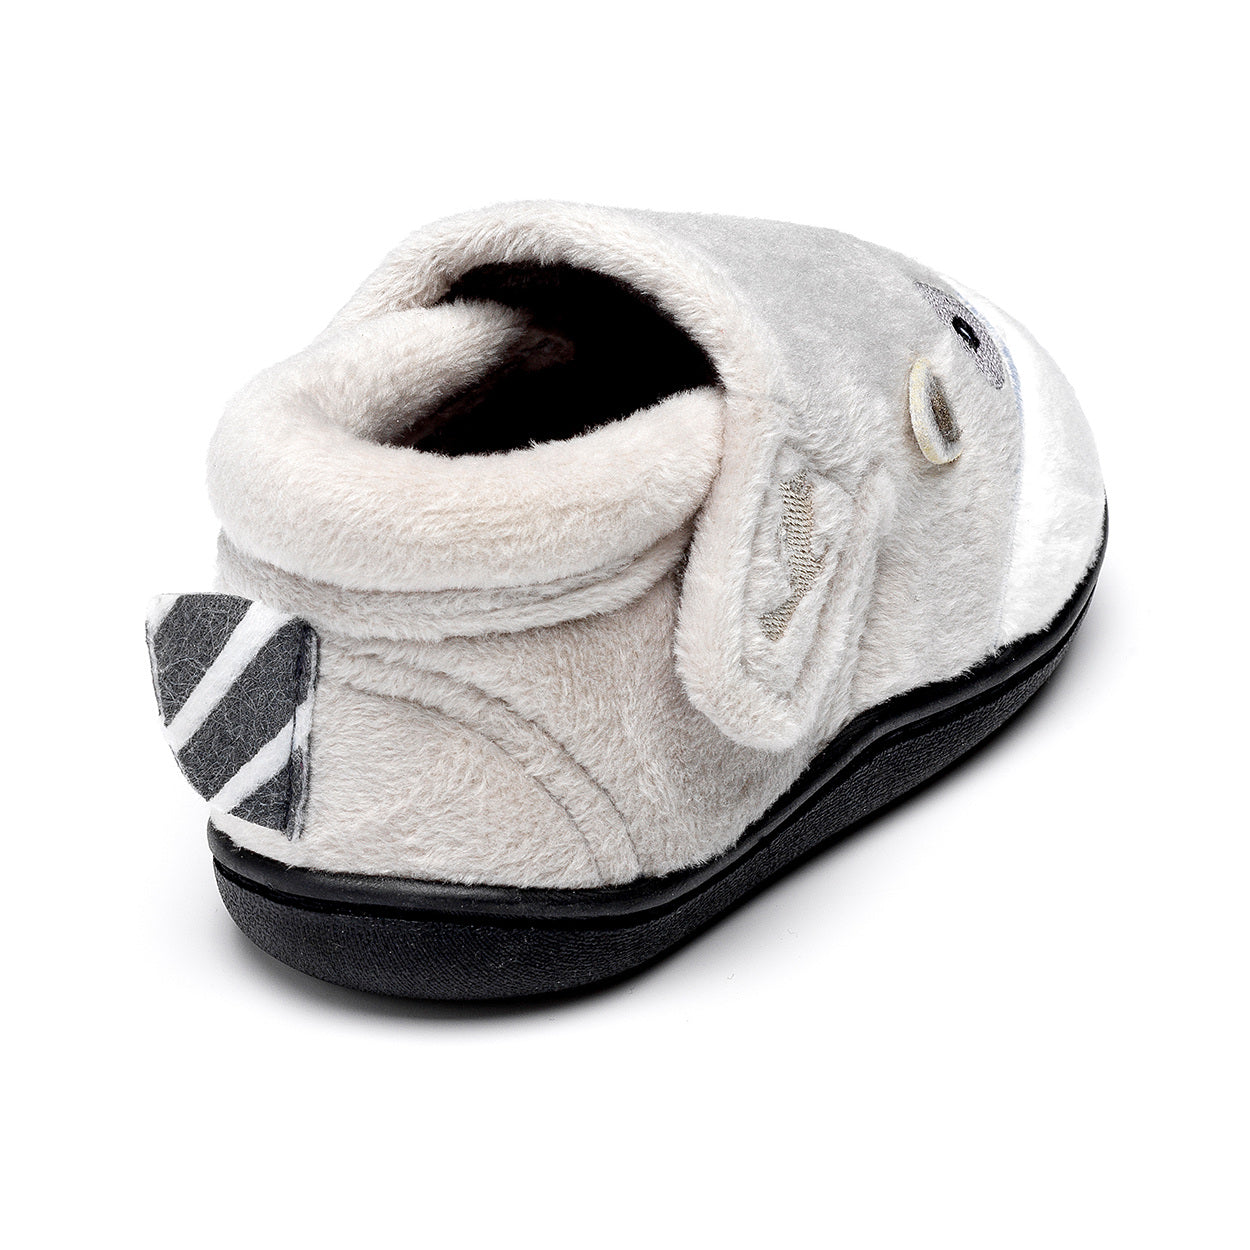 A unisex slipper by Chipmunks, style Rocco Racoon, in grey racoon design with velcro fastening. Angled view of back.